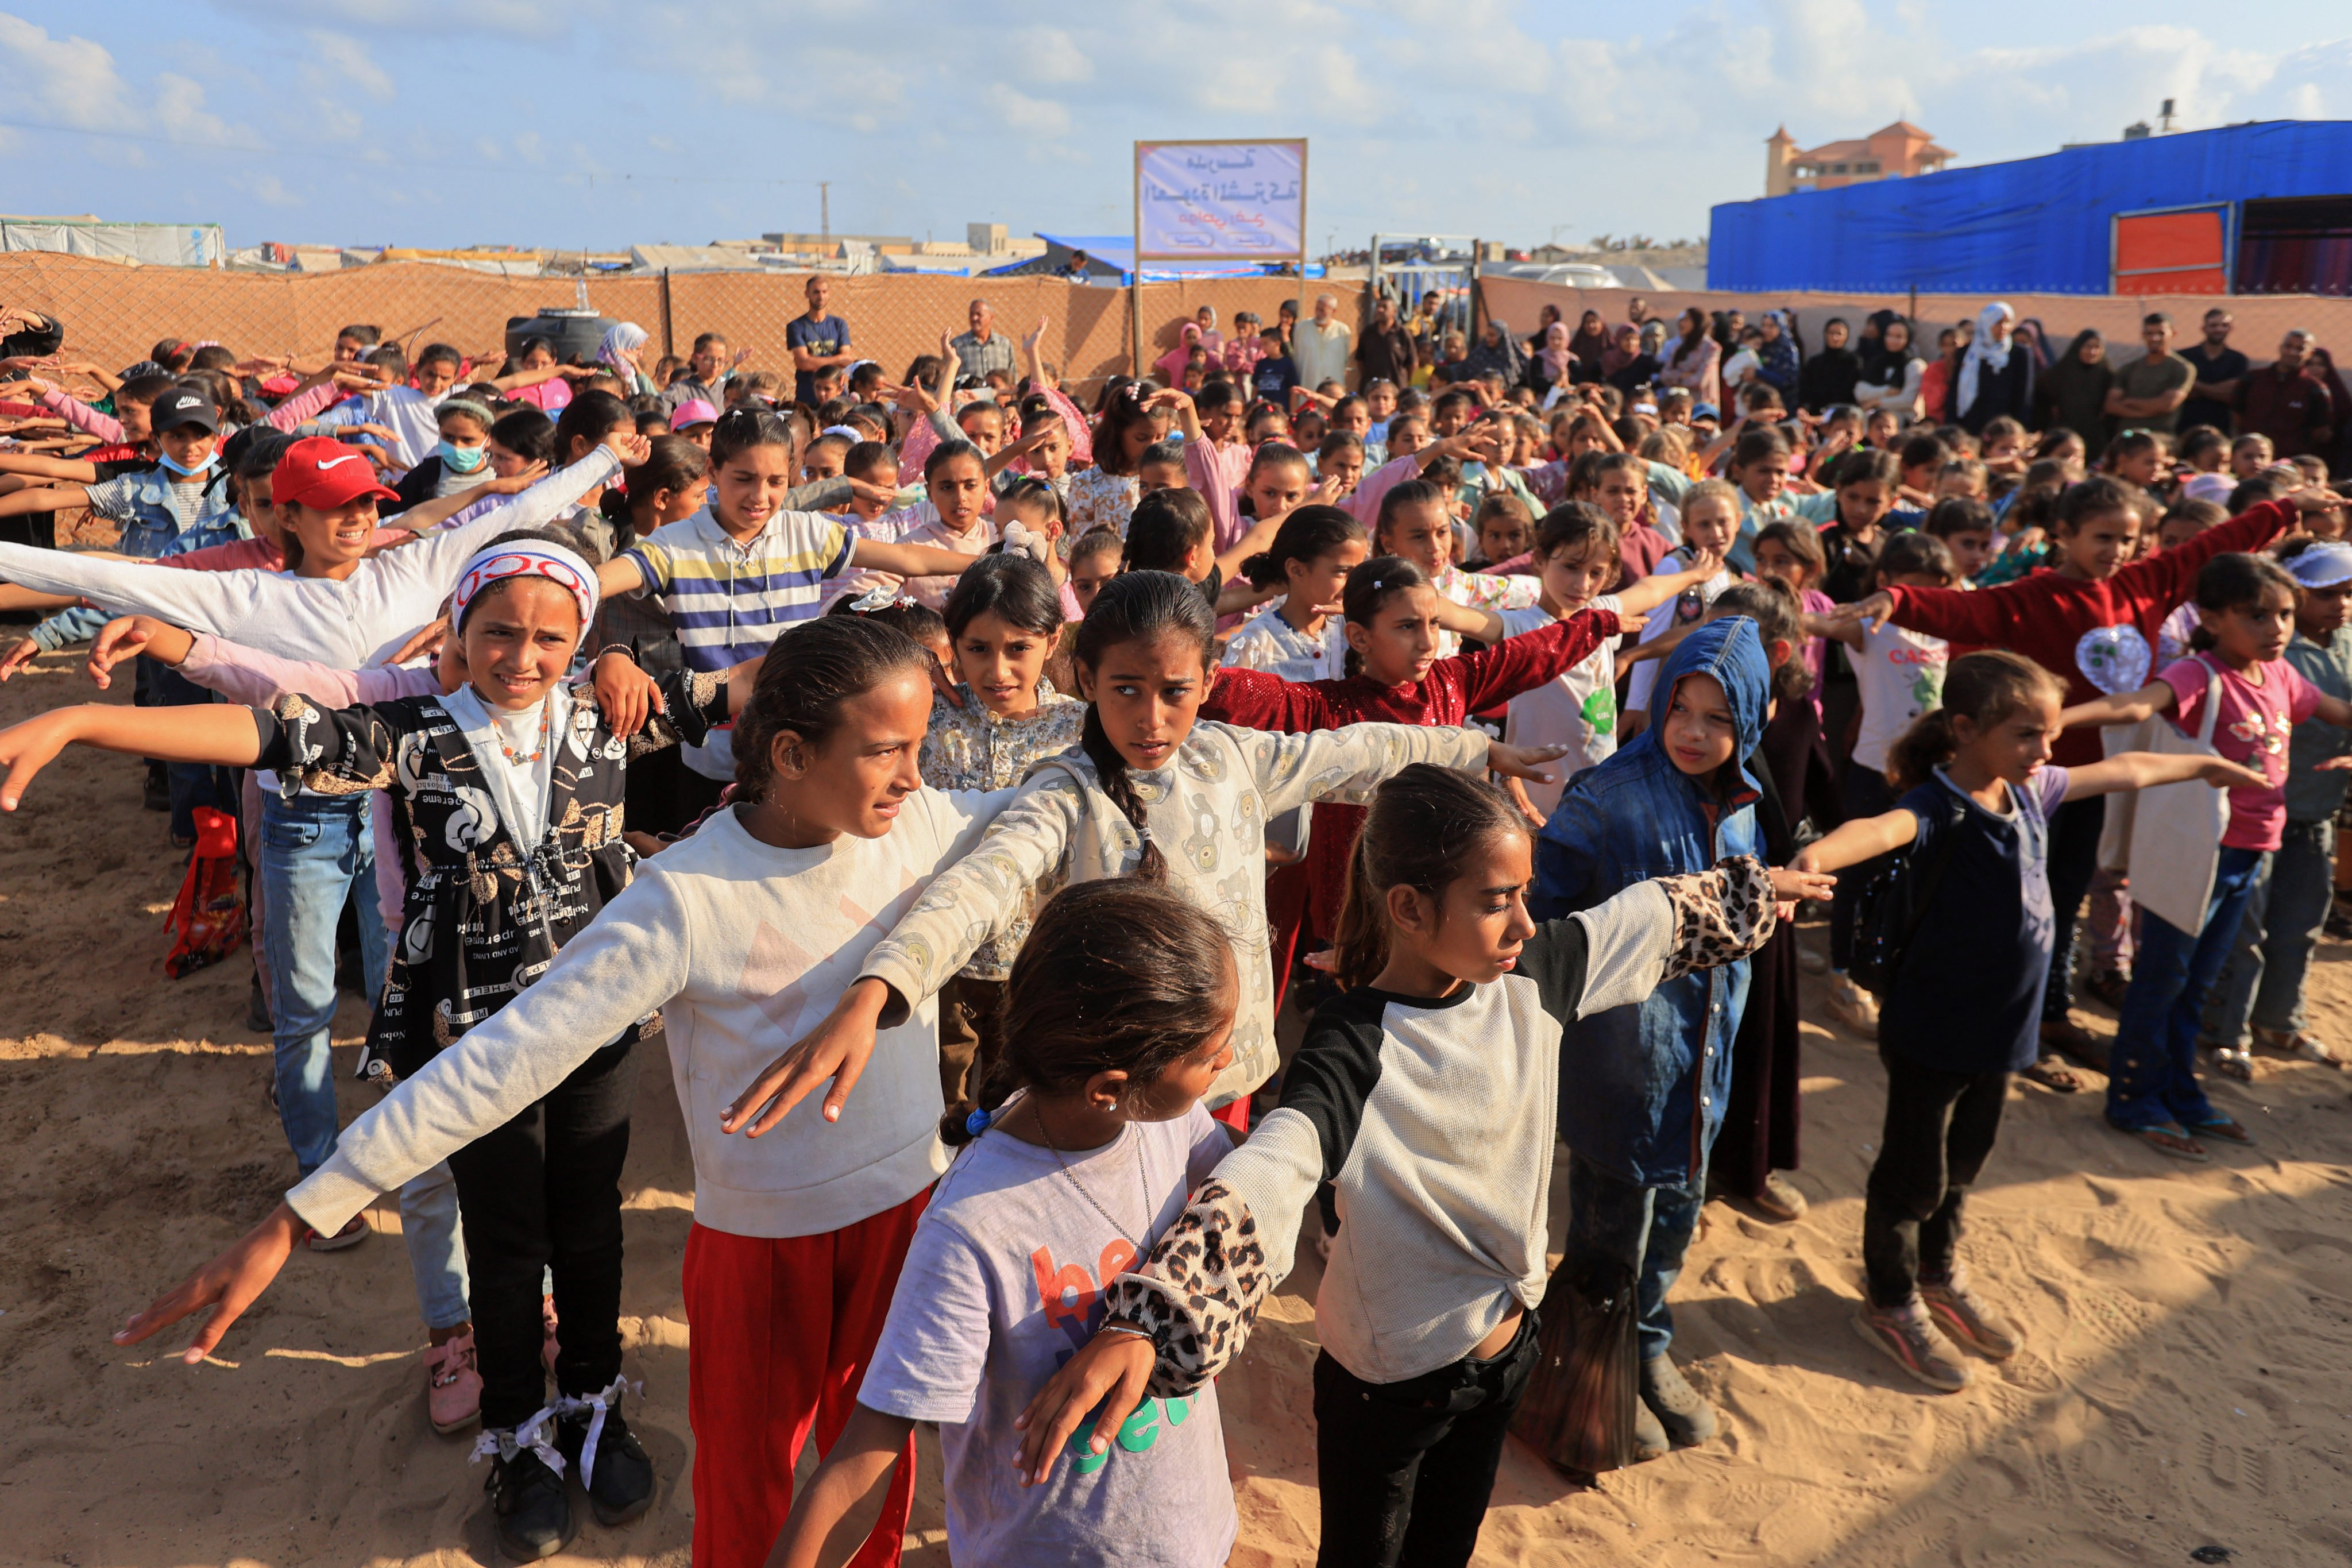 Palestinian students take part in outdoor activities at a makeshift school in the southern Gaza Strip city of Rafah on April 30. Photo: Xinhua